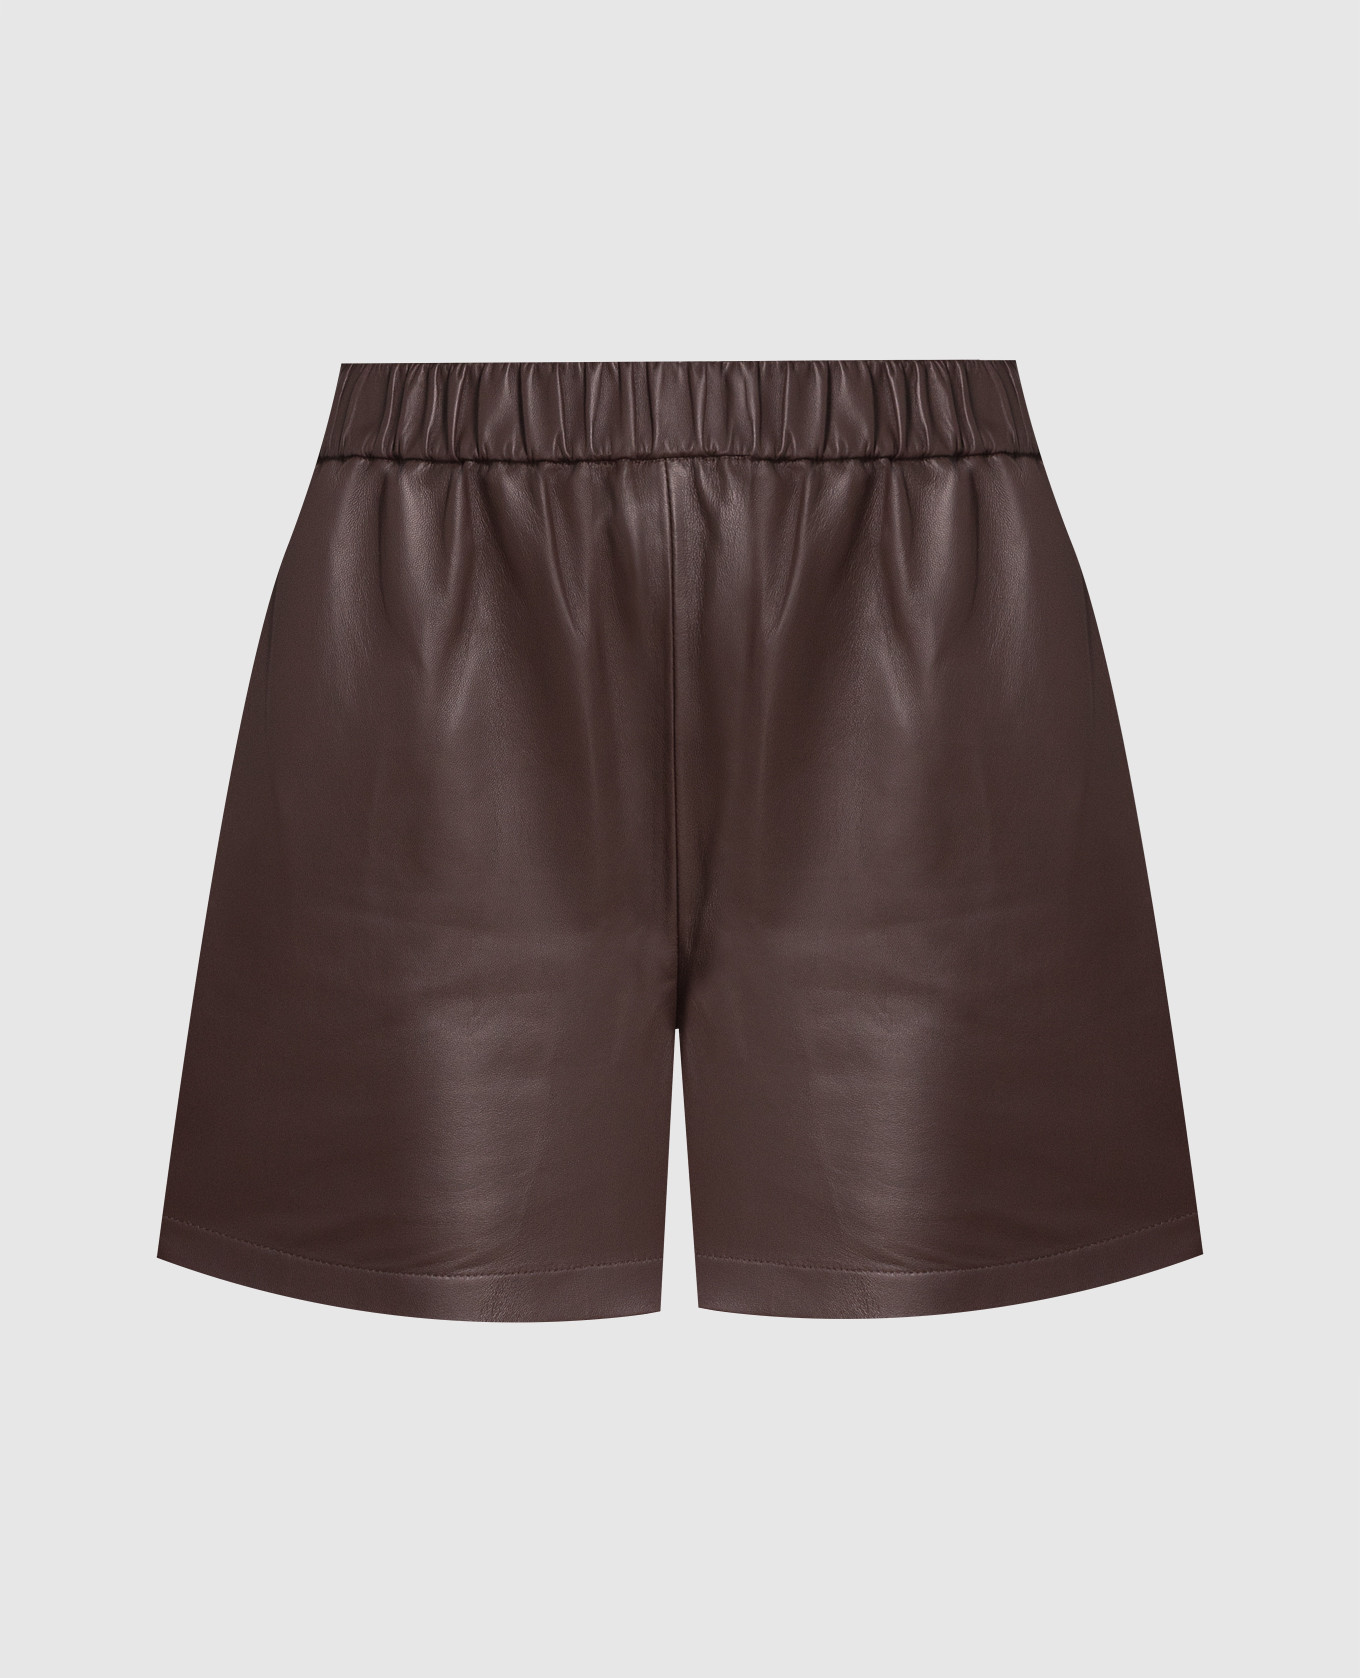 Brown leather shorts